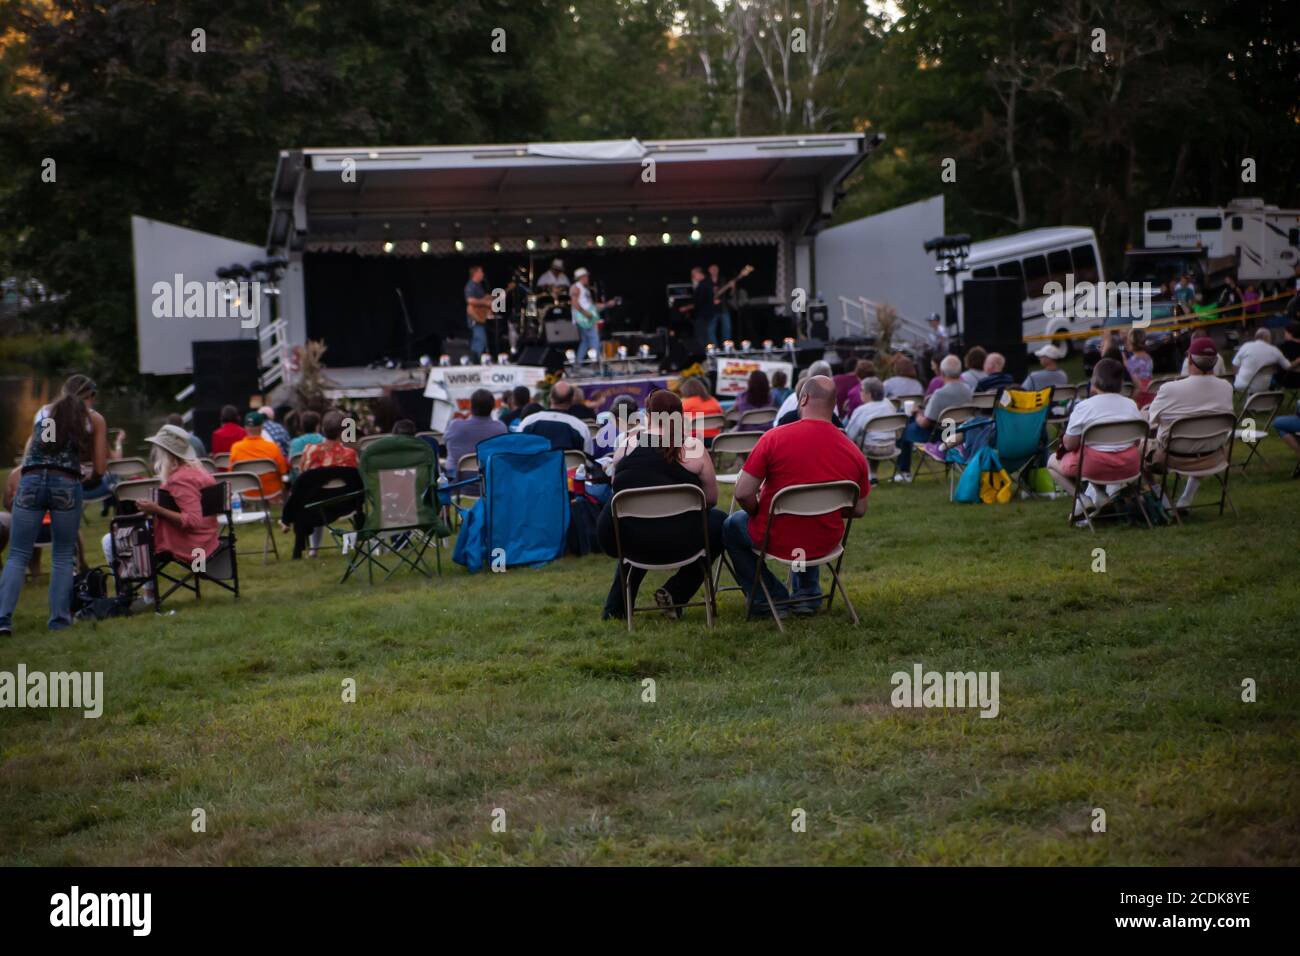 The rock band is performing on the stage, and the audience is watching the performance during a country fair. Stock Photo